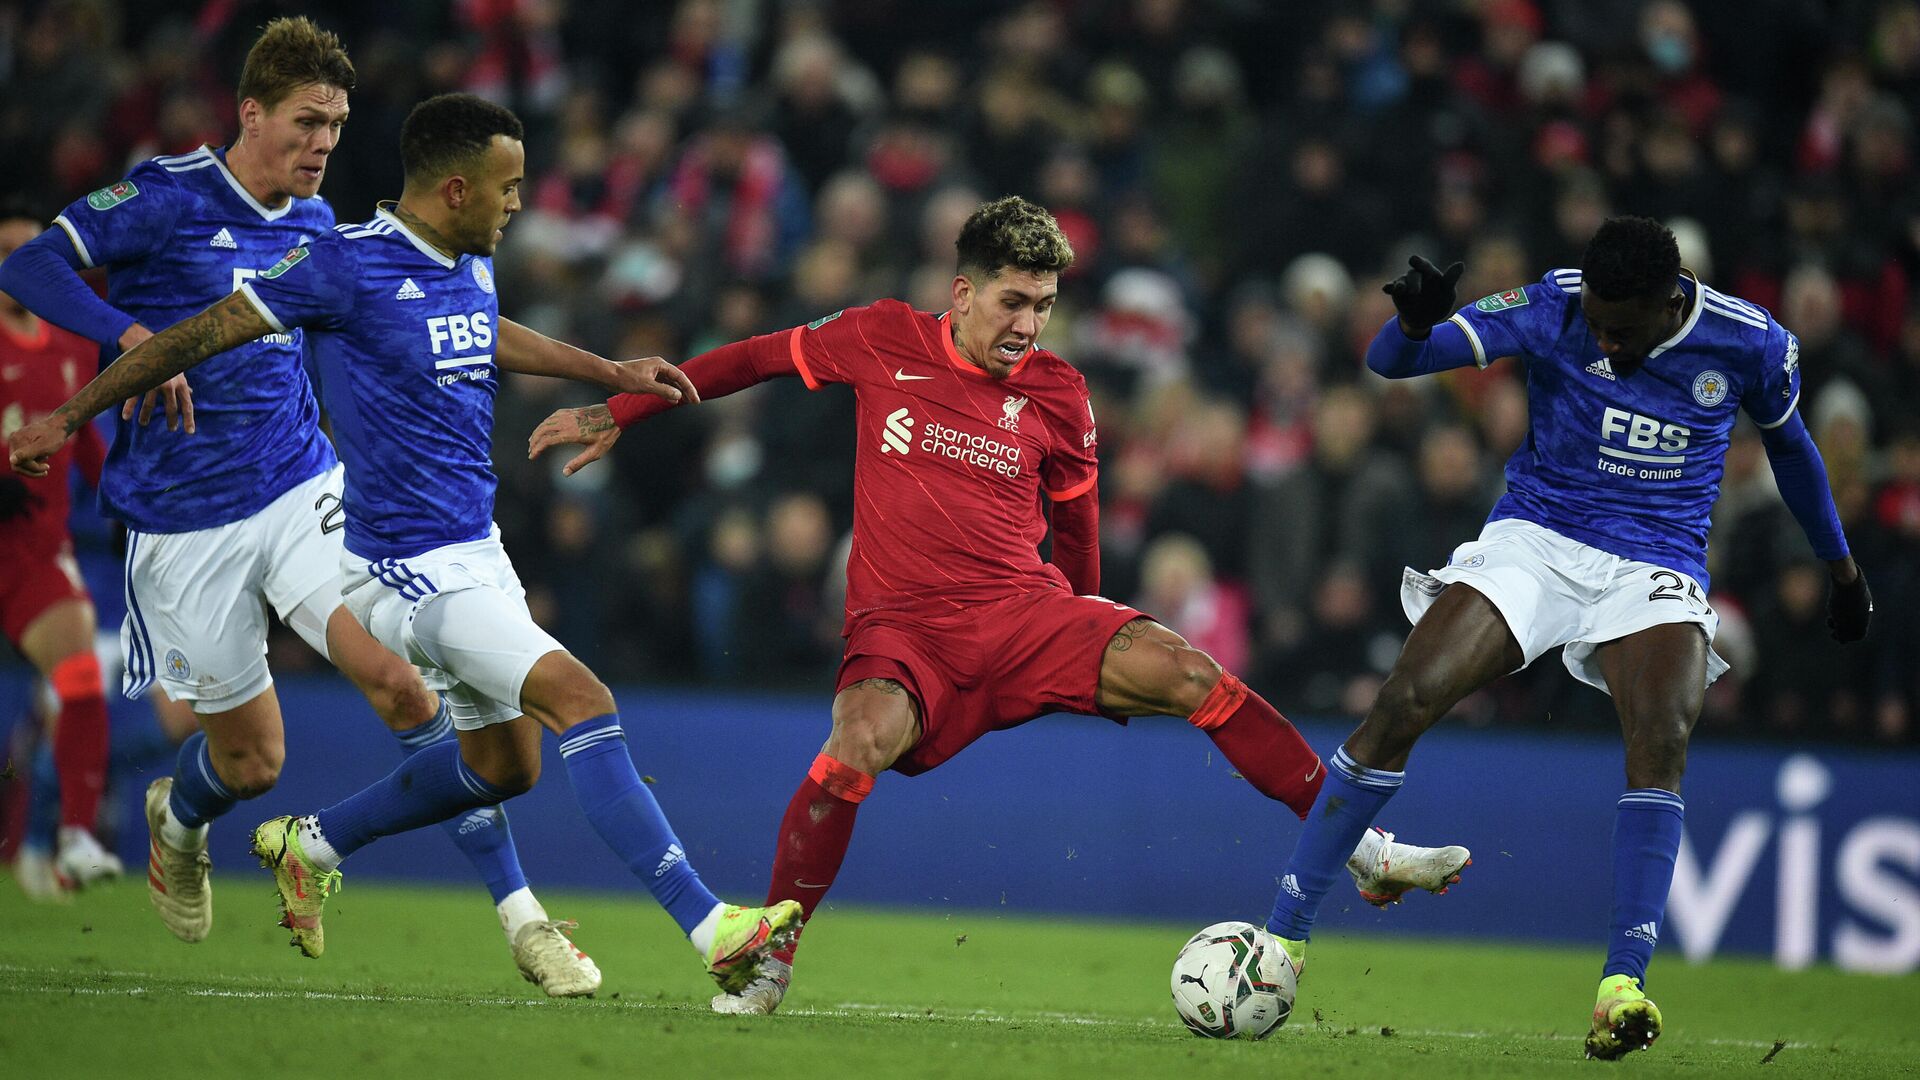 Liverpool's Brazilian midfielder Roberto Firmino (C) vies with Leicester City's Nigerian midfielder Wilfred Ndidi (R), Leicester City's Danish defender Jannik Vestergaard (L) and Leicester City's English defender Ryan Bertrand (2nd L) during the English League Cup quarter-final football match between Liverpool and Leicester City at Anfield in Liverpool, north west England on December 22, 2021. (Photo by Oli SCARFF / AFP) / RESTRICTED TO EDITORIAL USE. No use with unauthorized audio, video, data, fixture lists, club/league logos or 'live' services. Online in-match use limited to 120 images. An additional 40 images may be used in extra time. No video emulation. Social media in-match use limited to 120 images. An additional 40 images may be used in extra time. No use in betting publications, games or single club/league/player publications. /  - РИА Новости, 1920, 23.12.2021